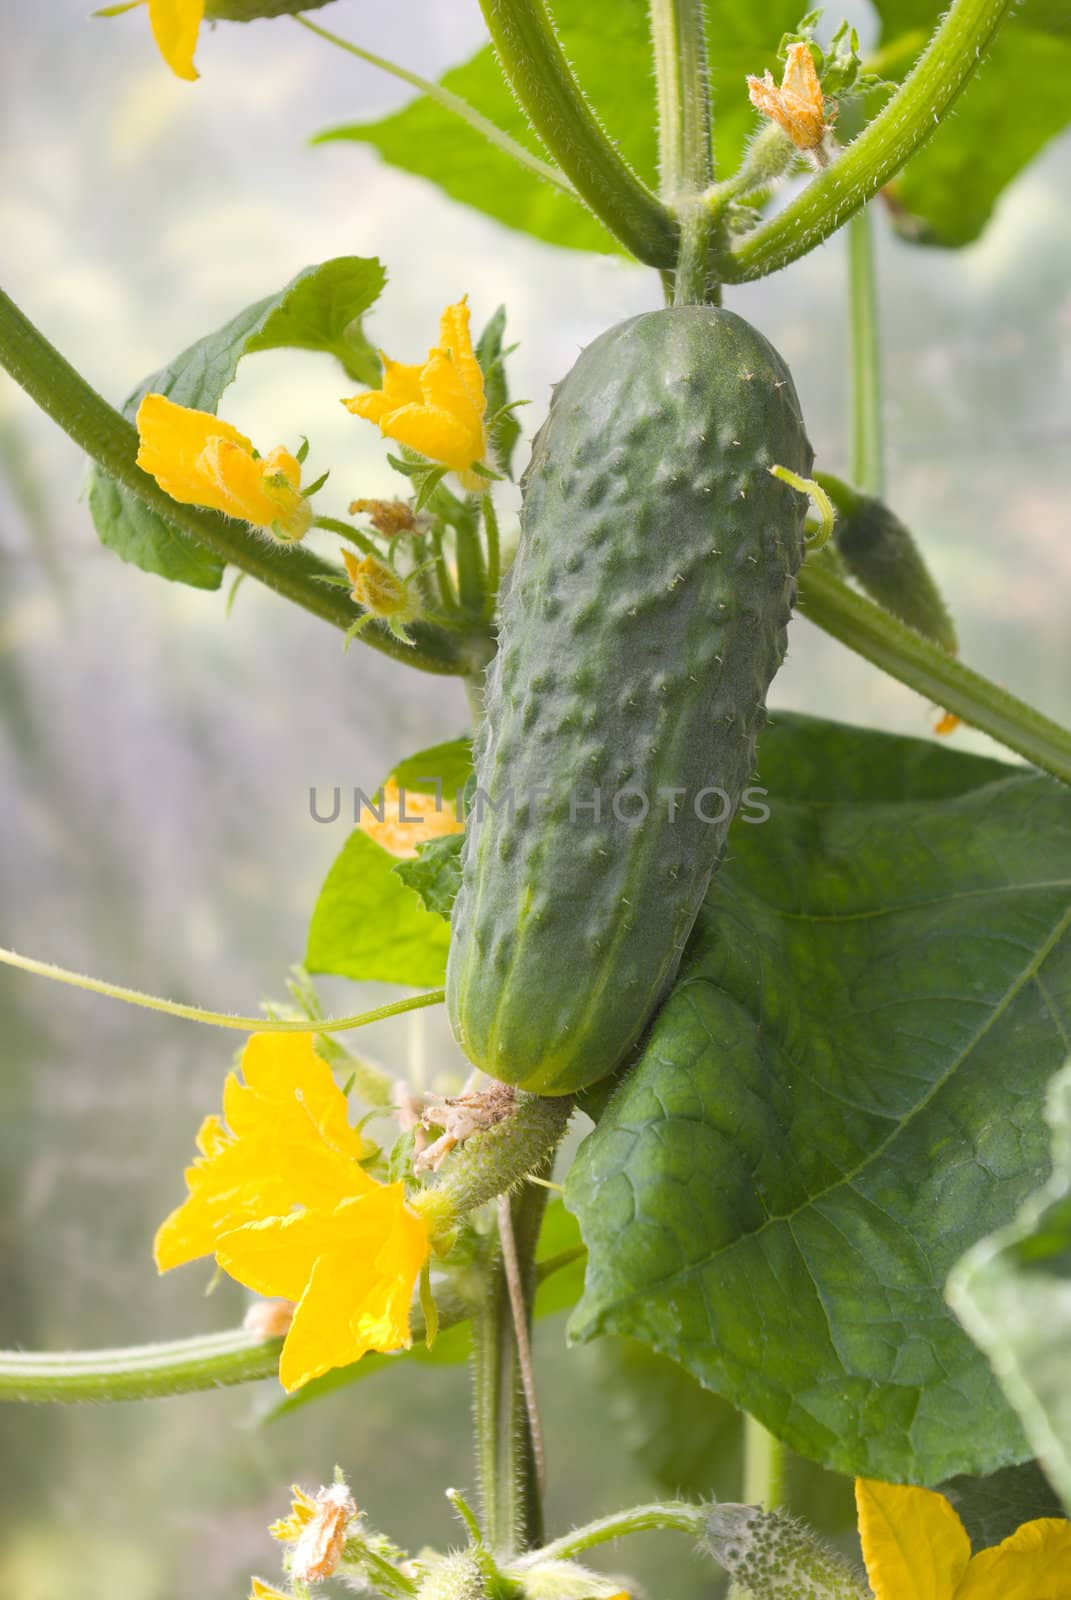 Green cucumber in hothouse.Growing cucumbers